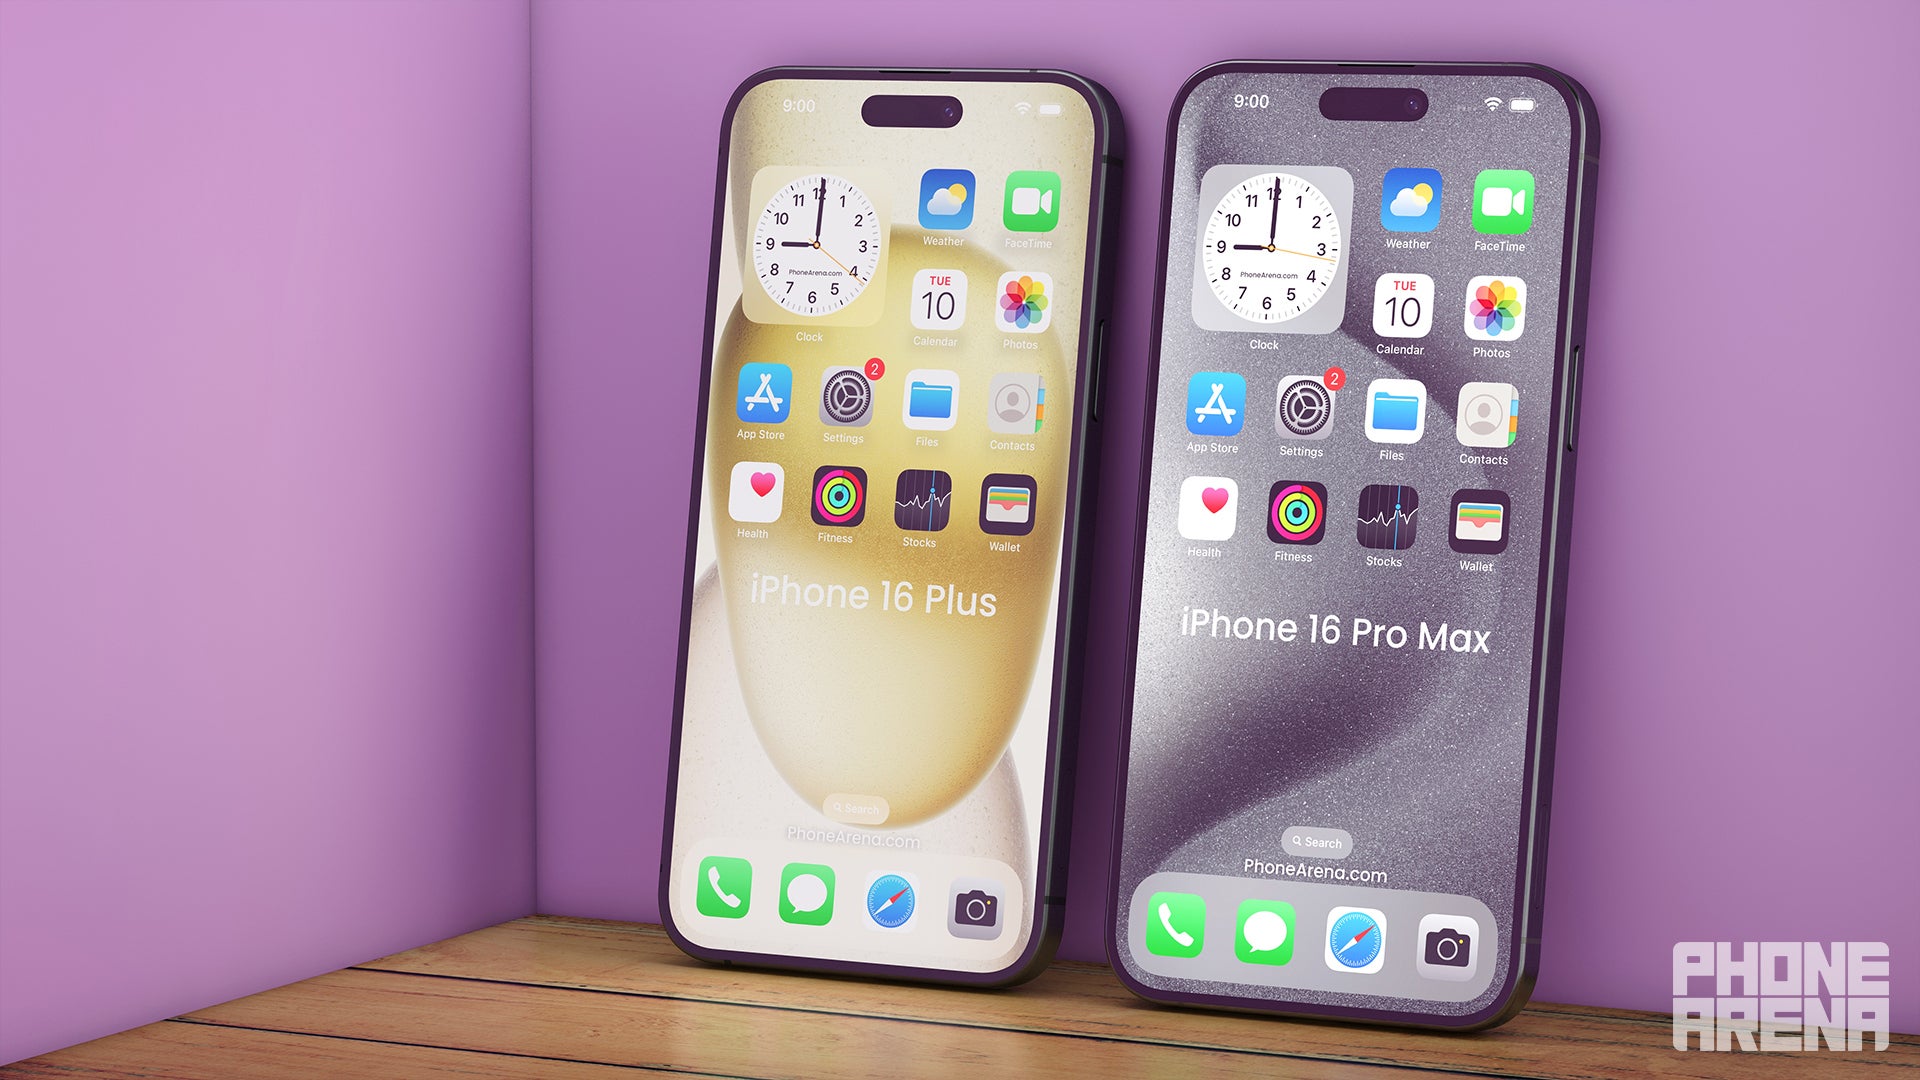 Image credit – PhoneArena – The biggest iPhones yet: here's what the iPhone 16 Pro and Pro Max could look like next to the iPhone 15 Pro and Pro Max